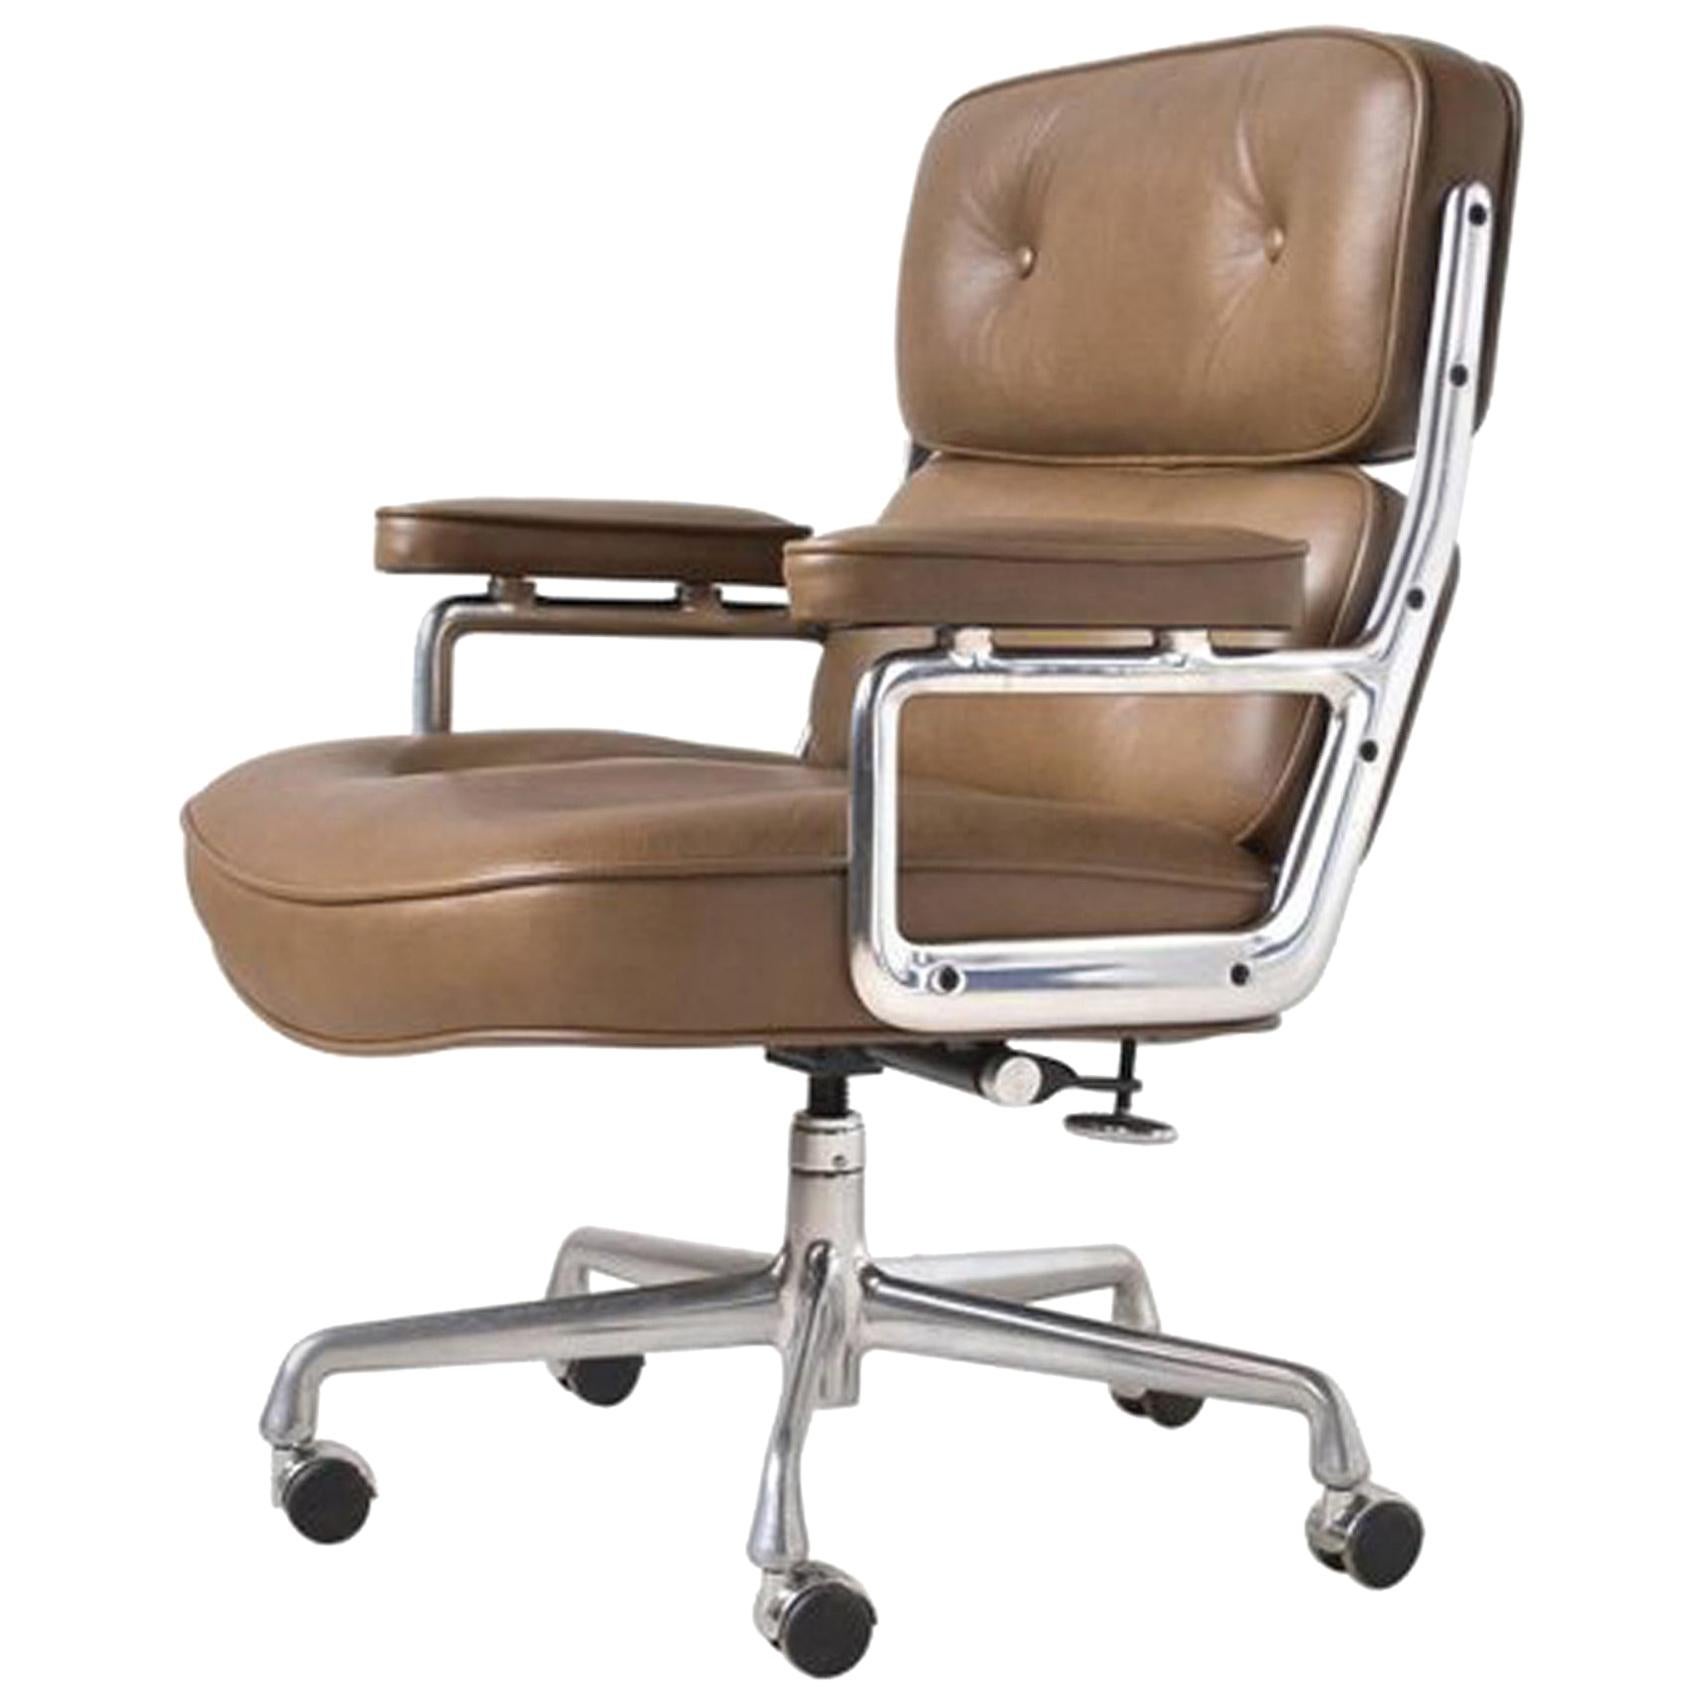 Charles and Ray Eames Time-Life Chair by Herman Miller